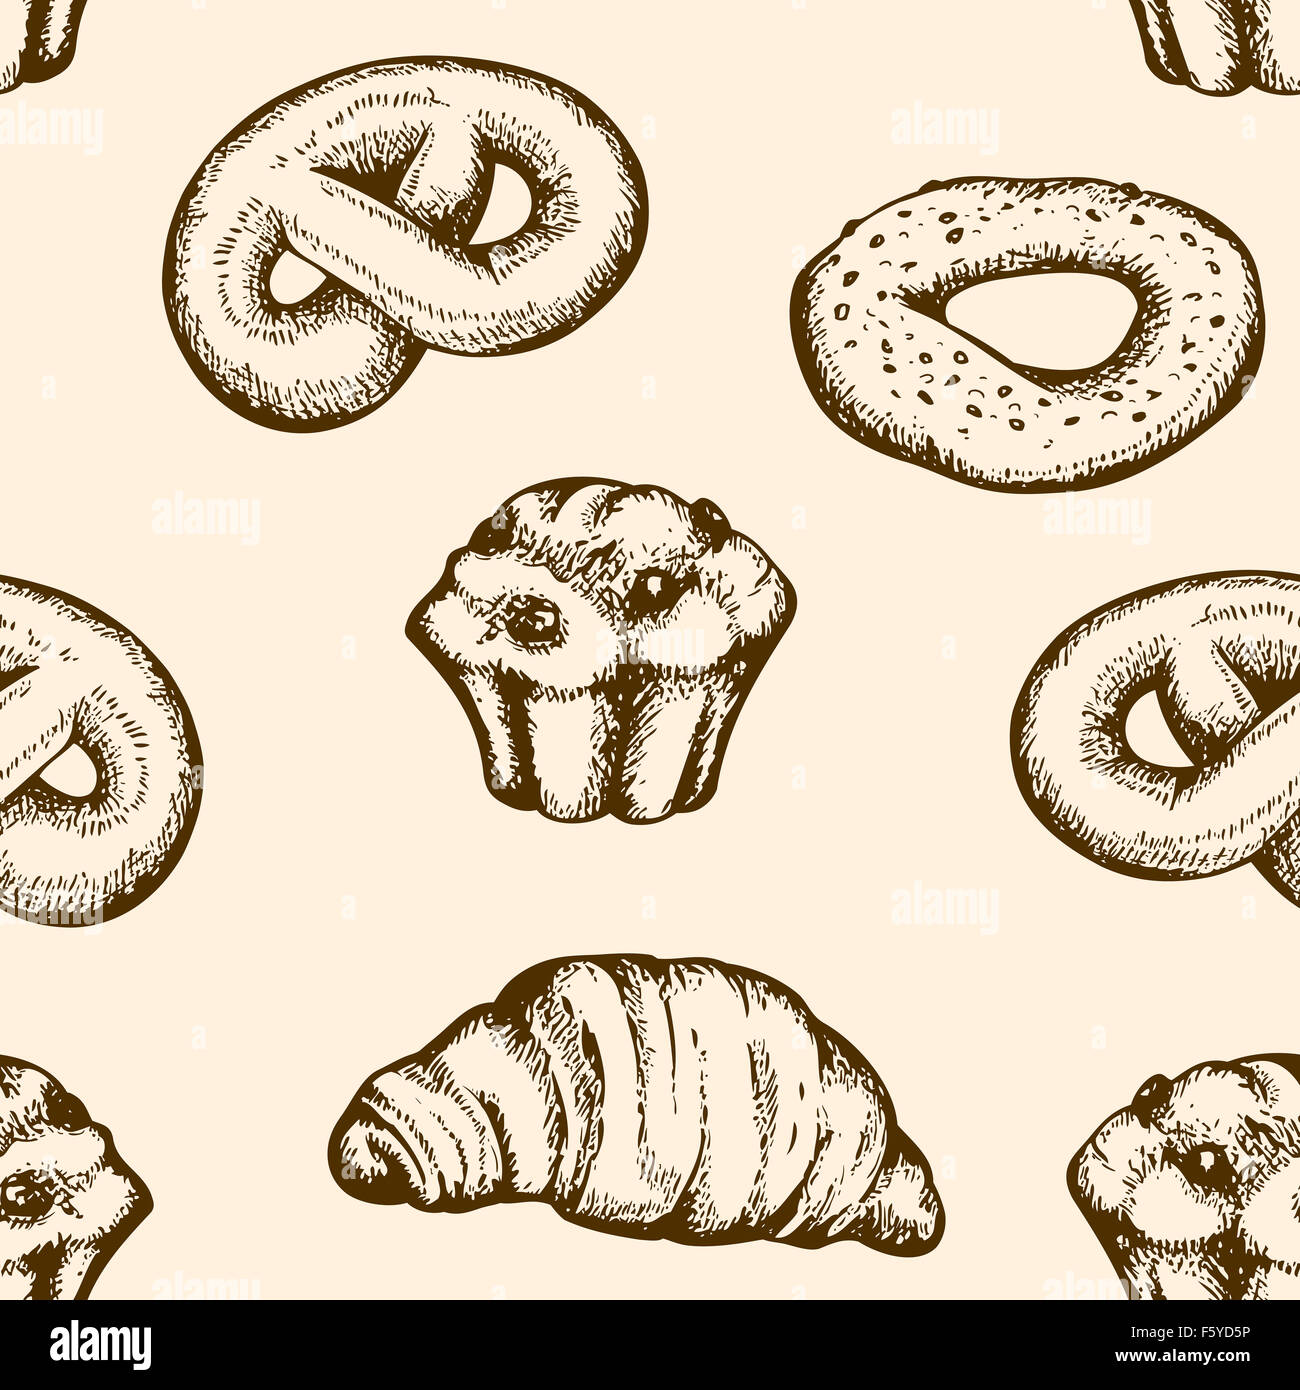 Seamless pattern  with vintage bakery, hand drawn illustration Stock Photo